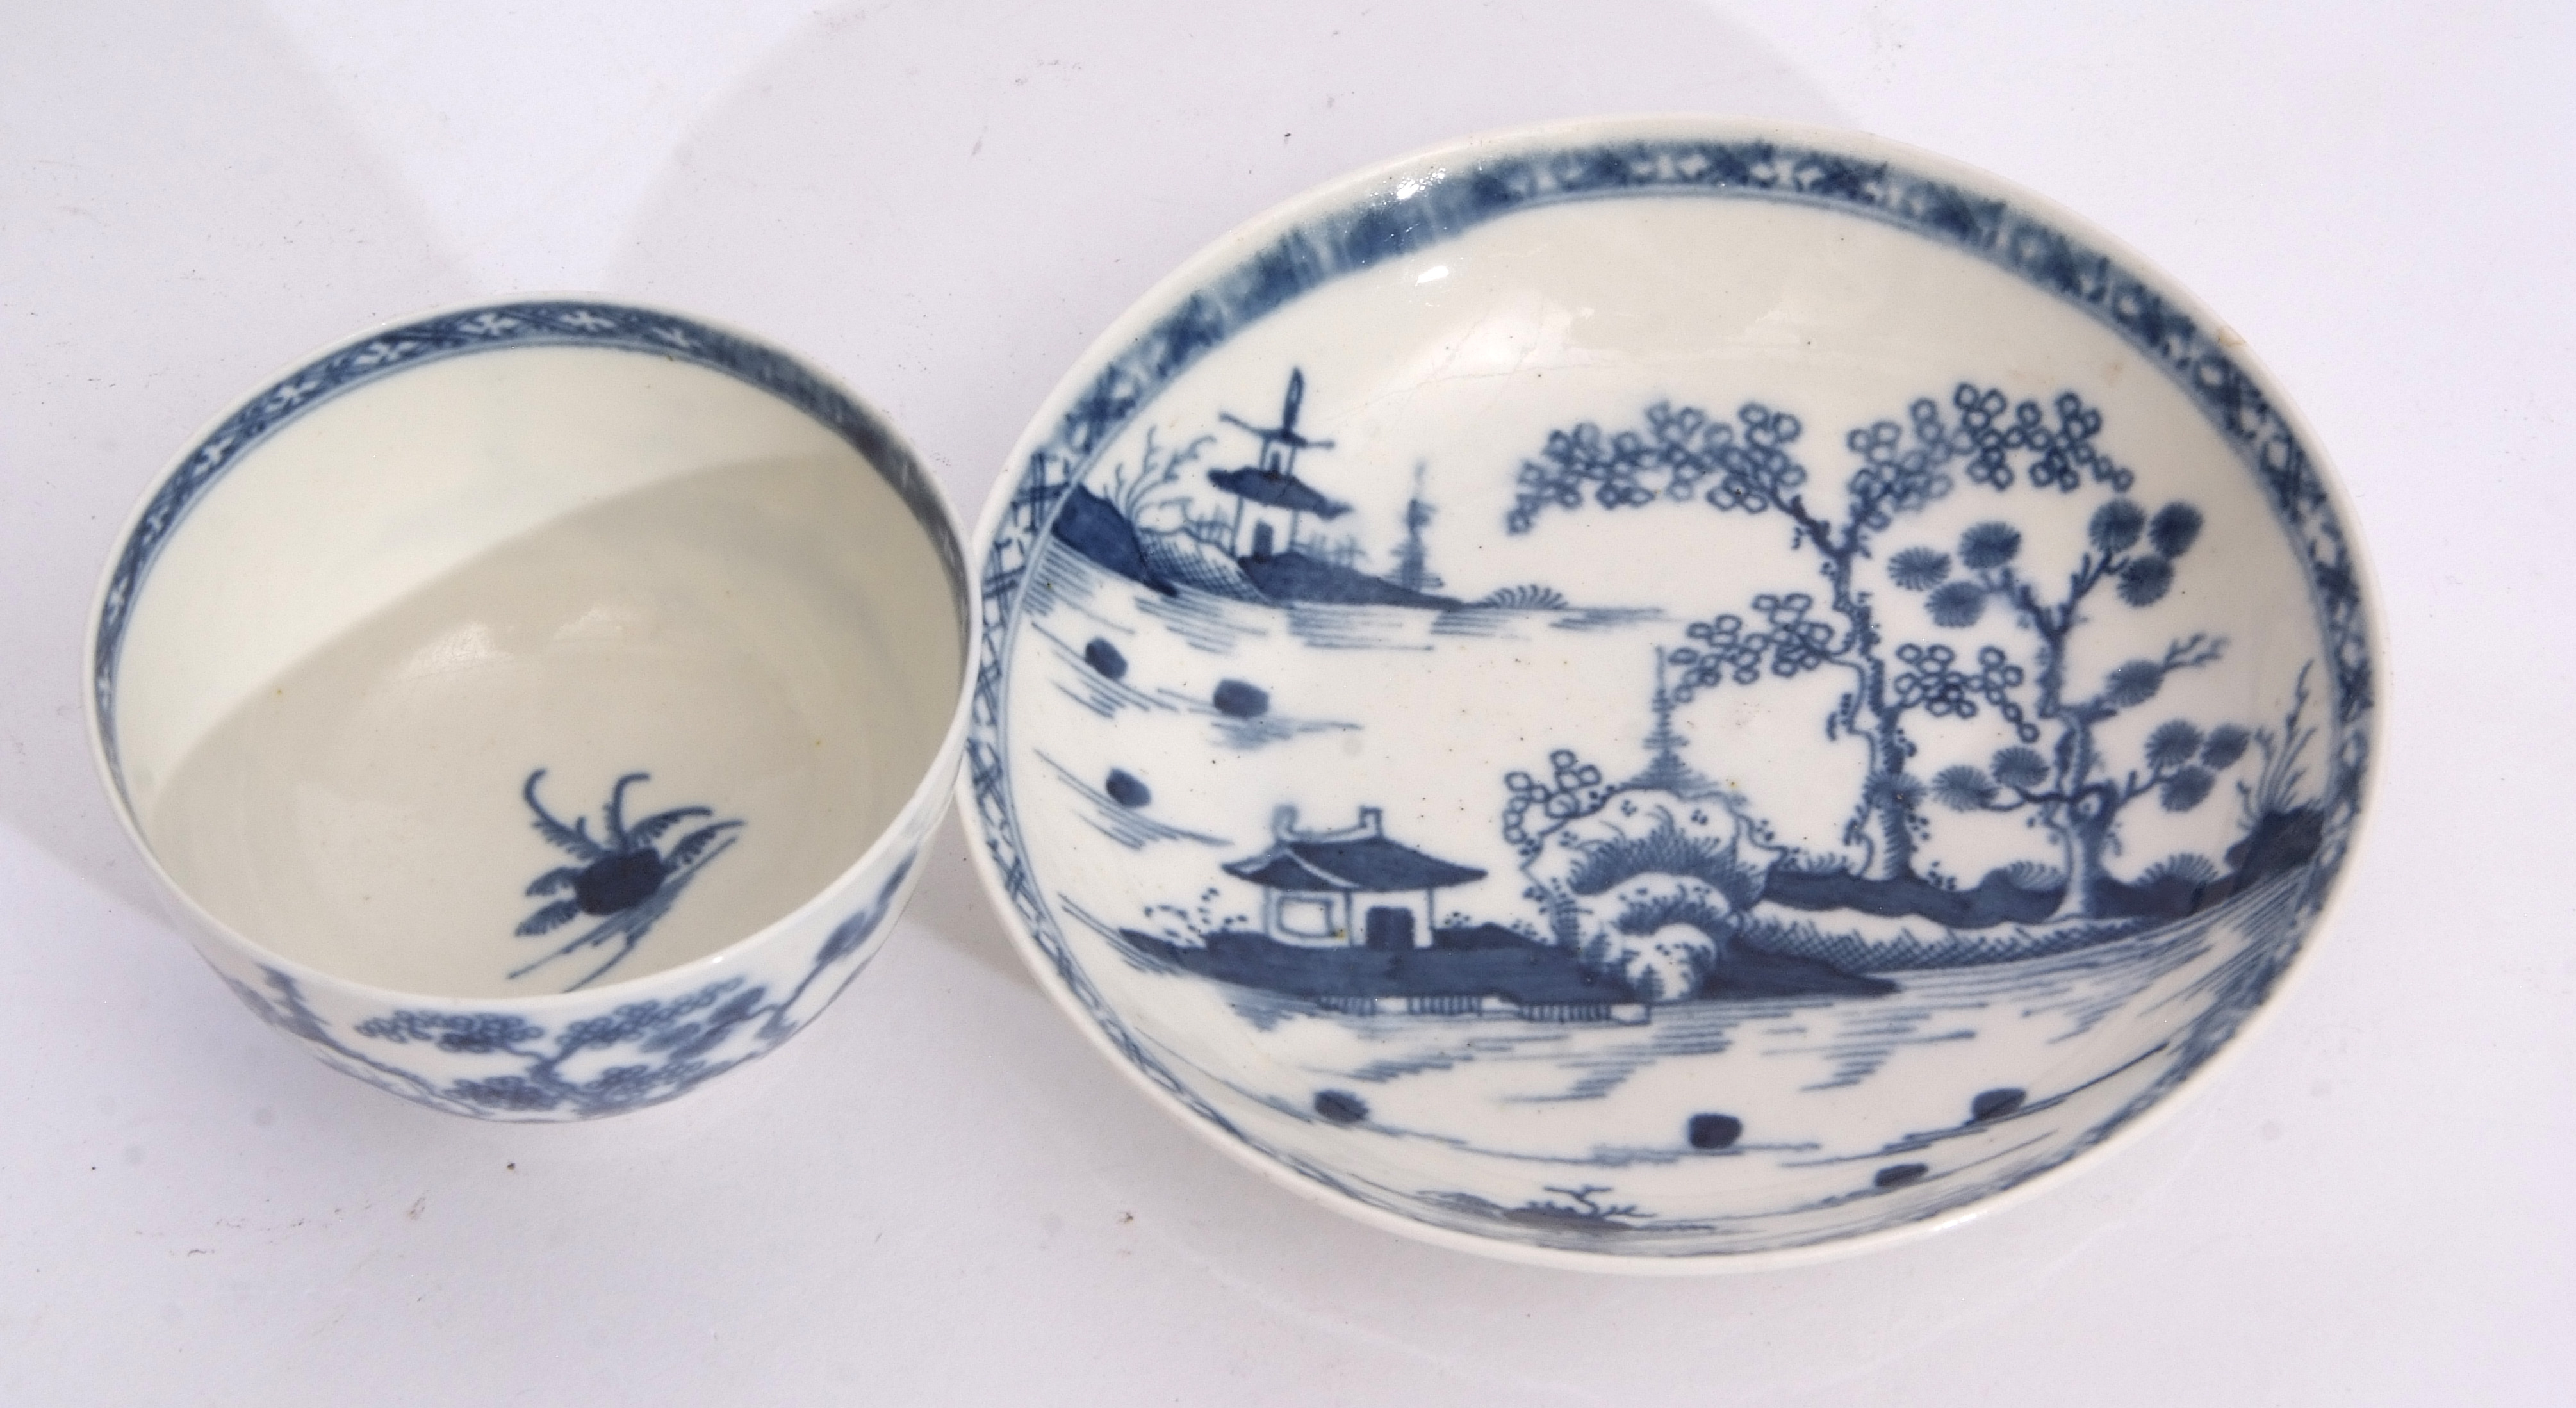 Worcester tea bowl and saucer decorated in blue and white with the Cannon Paul pattern with - Image 2 of 3